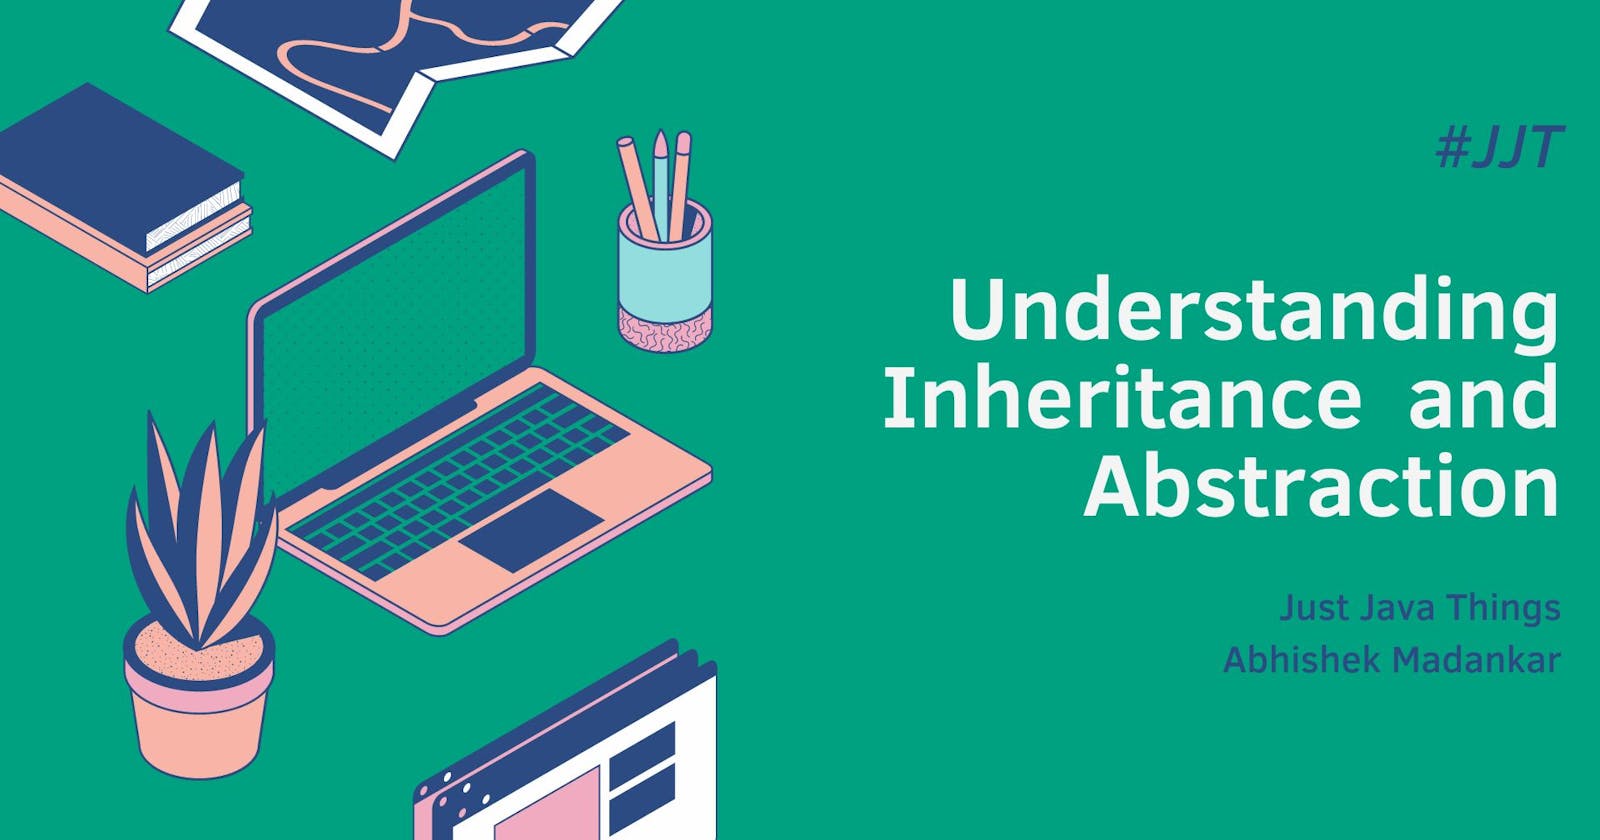 Inheritance and Abstraction